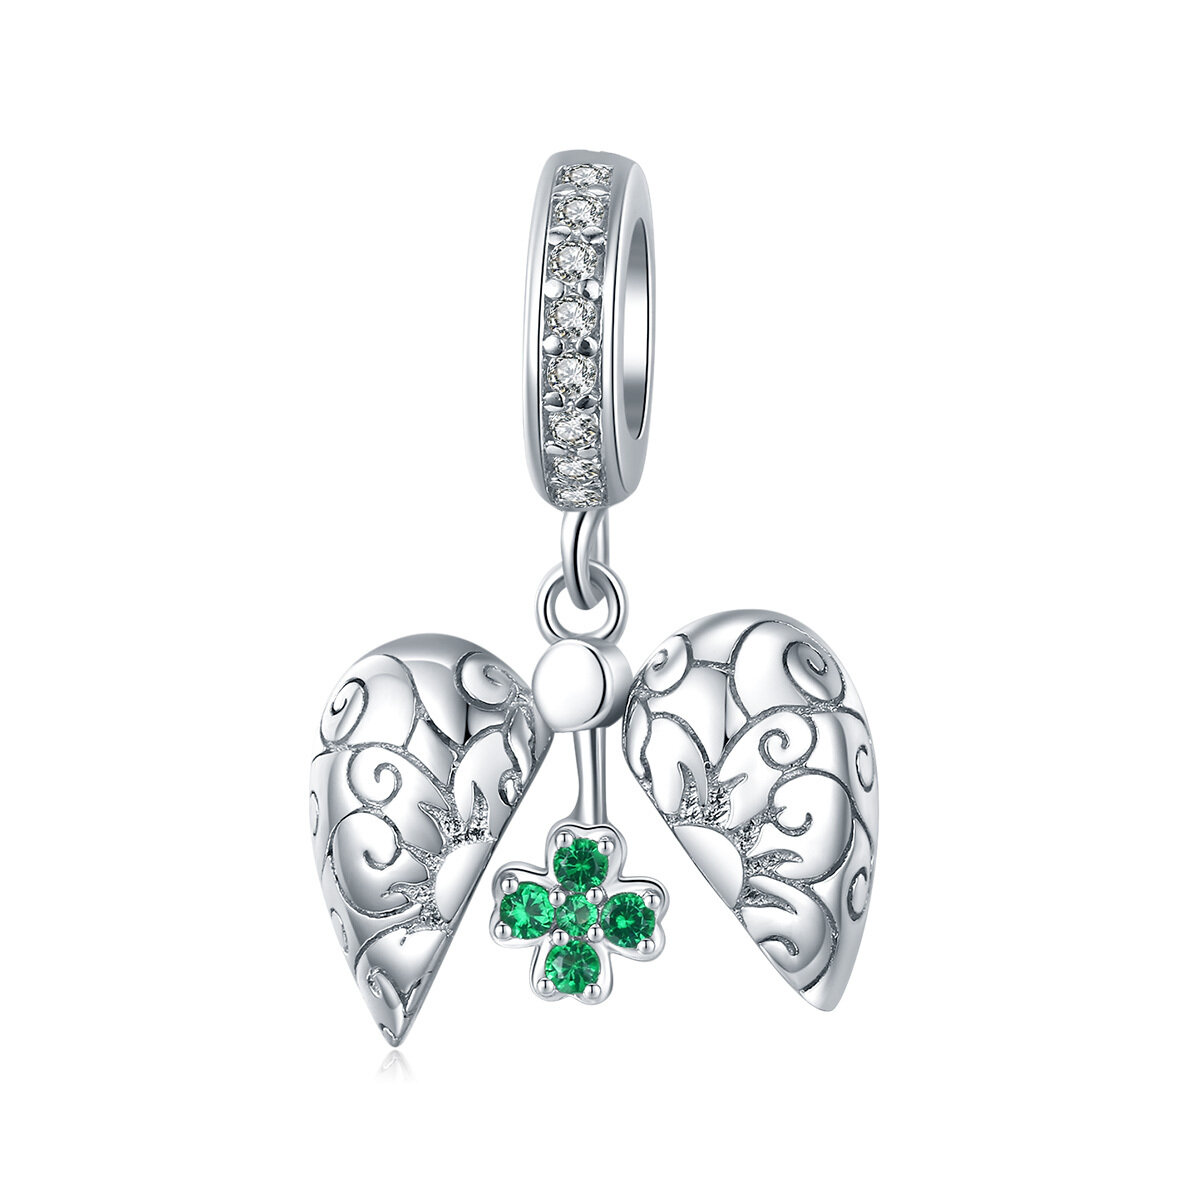 GemKing BSC302 Lucky Clover S925 Sterling Silver Charm